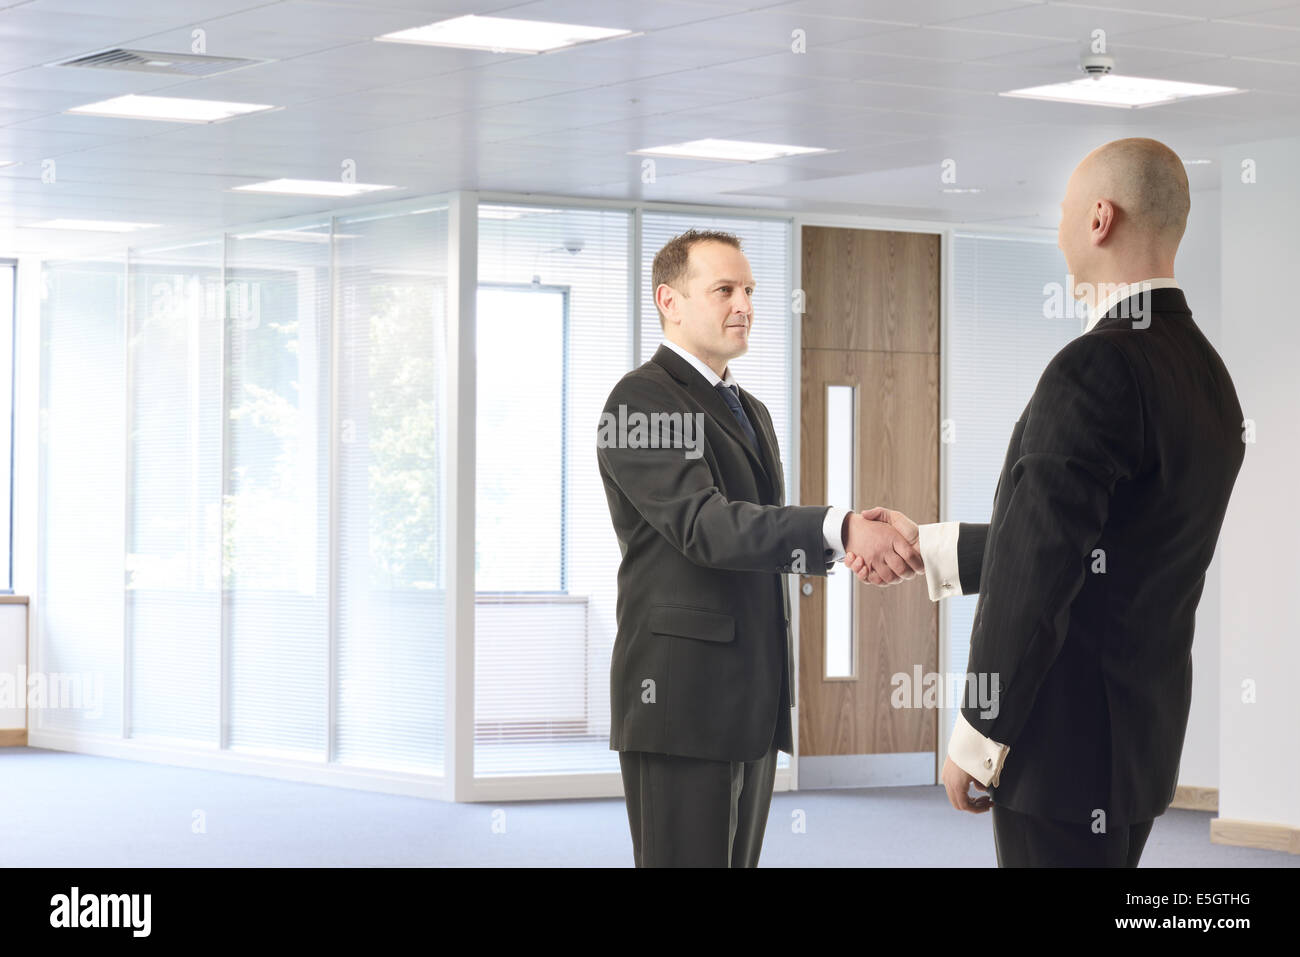 Two businessmen meeting in a brightly lit office space Stock Photo